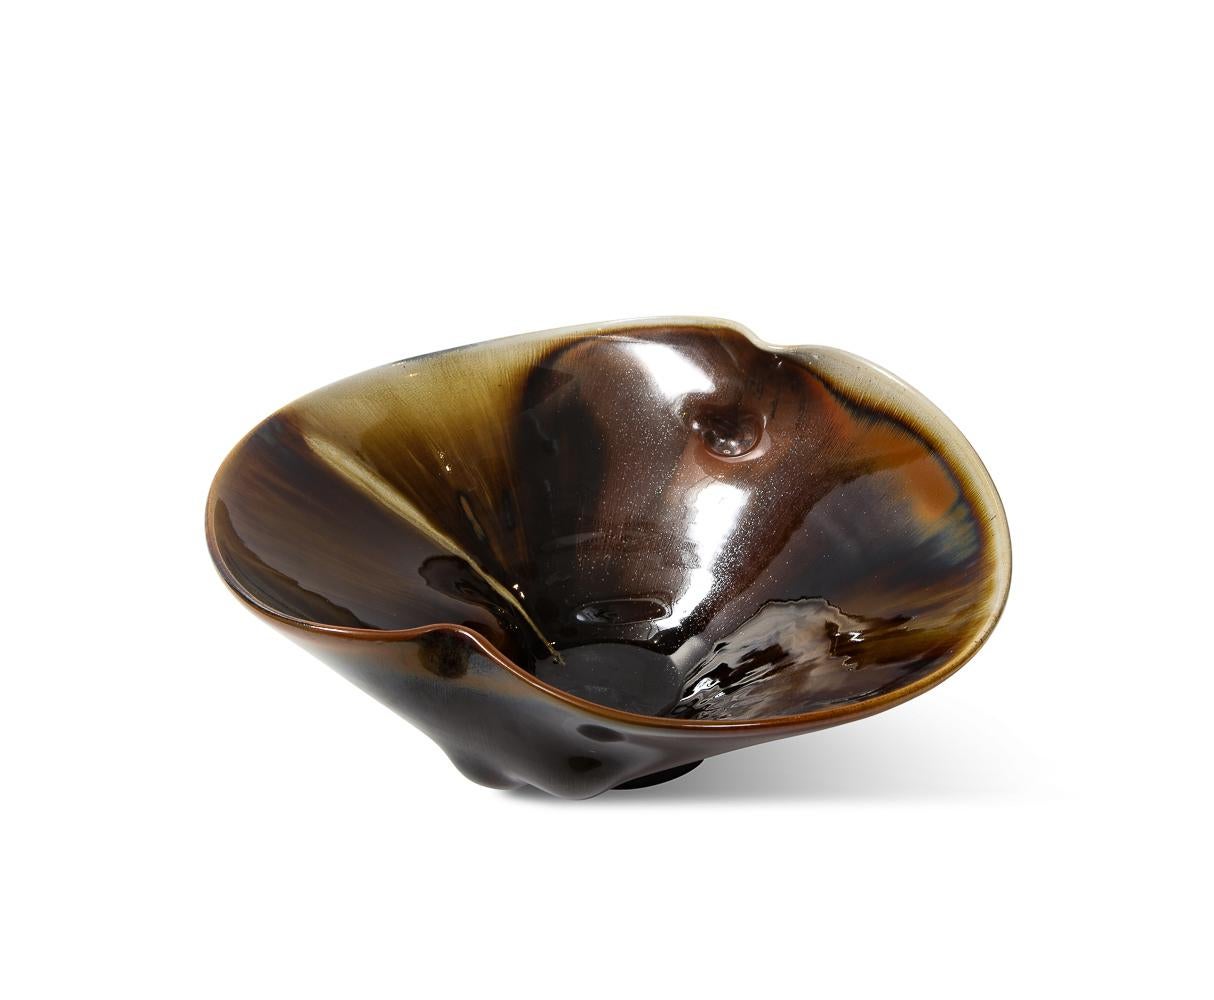 Hand-Crafted Glazed Porcelain Bowl #2101 by Chris Gustin